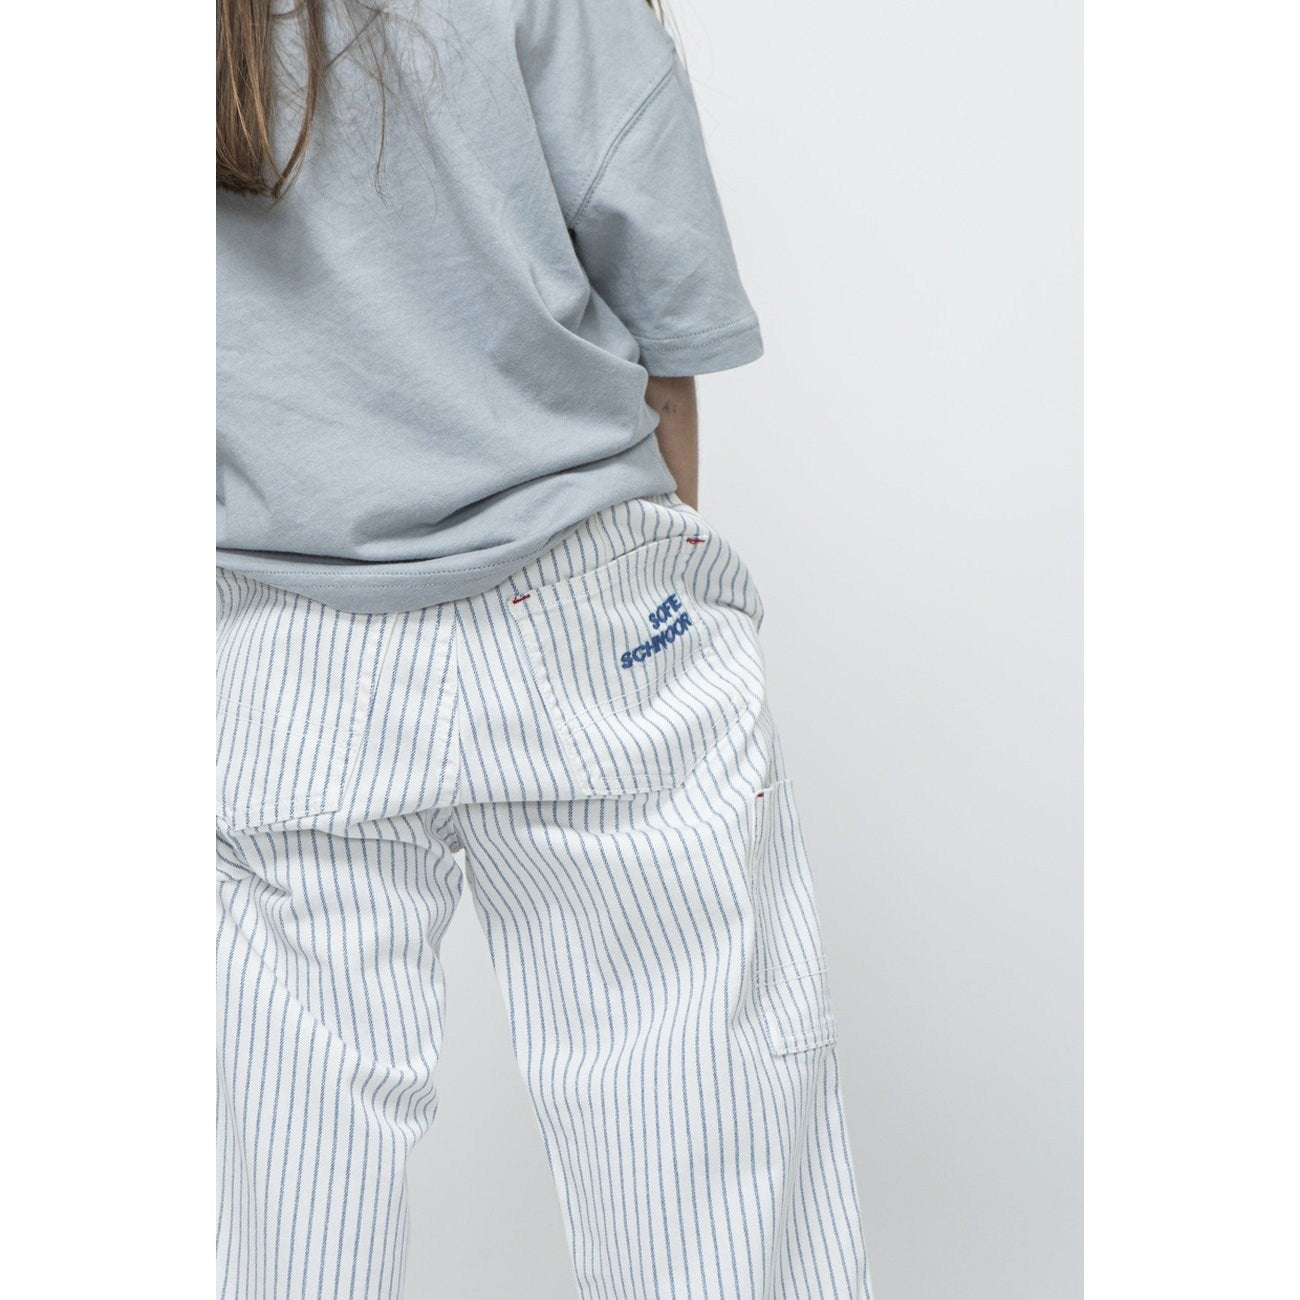 Sofie Schnoor Blue Striped Trousers 2